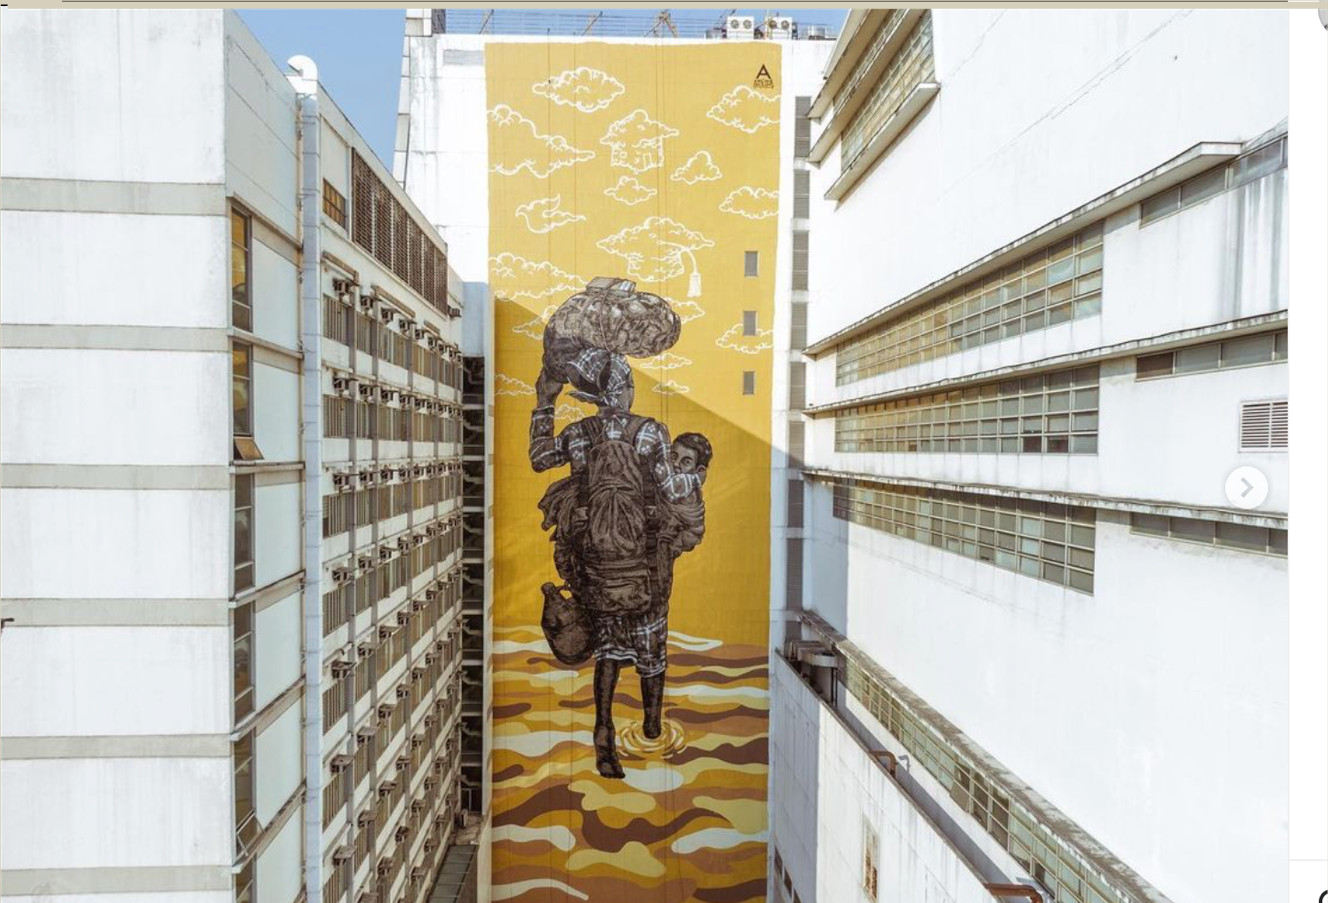 Bakwit, 2019. Mural by Archie Oclos